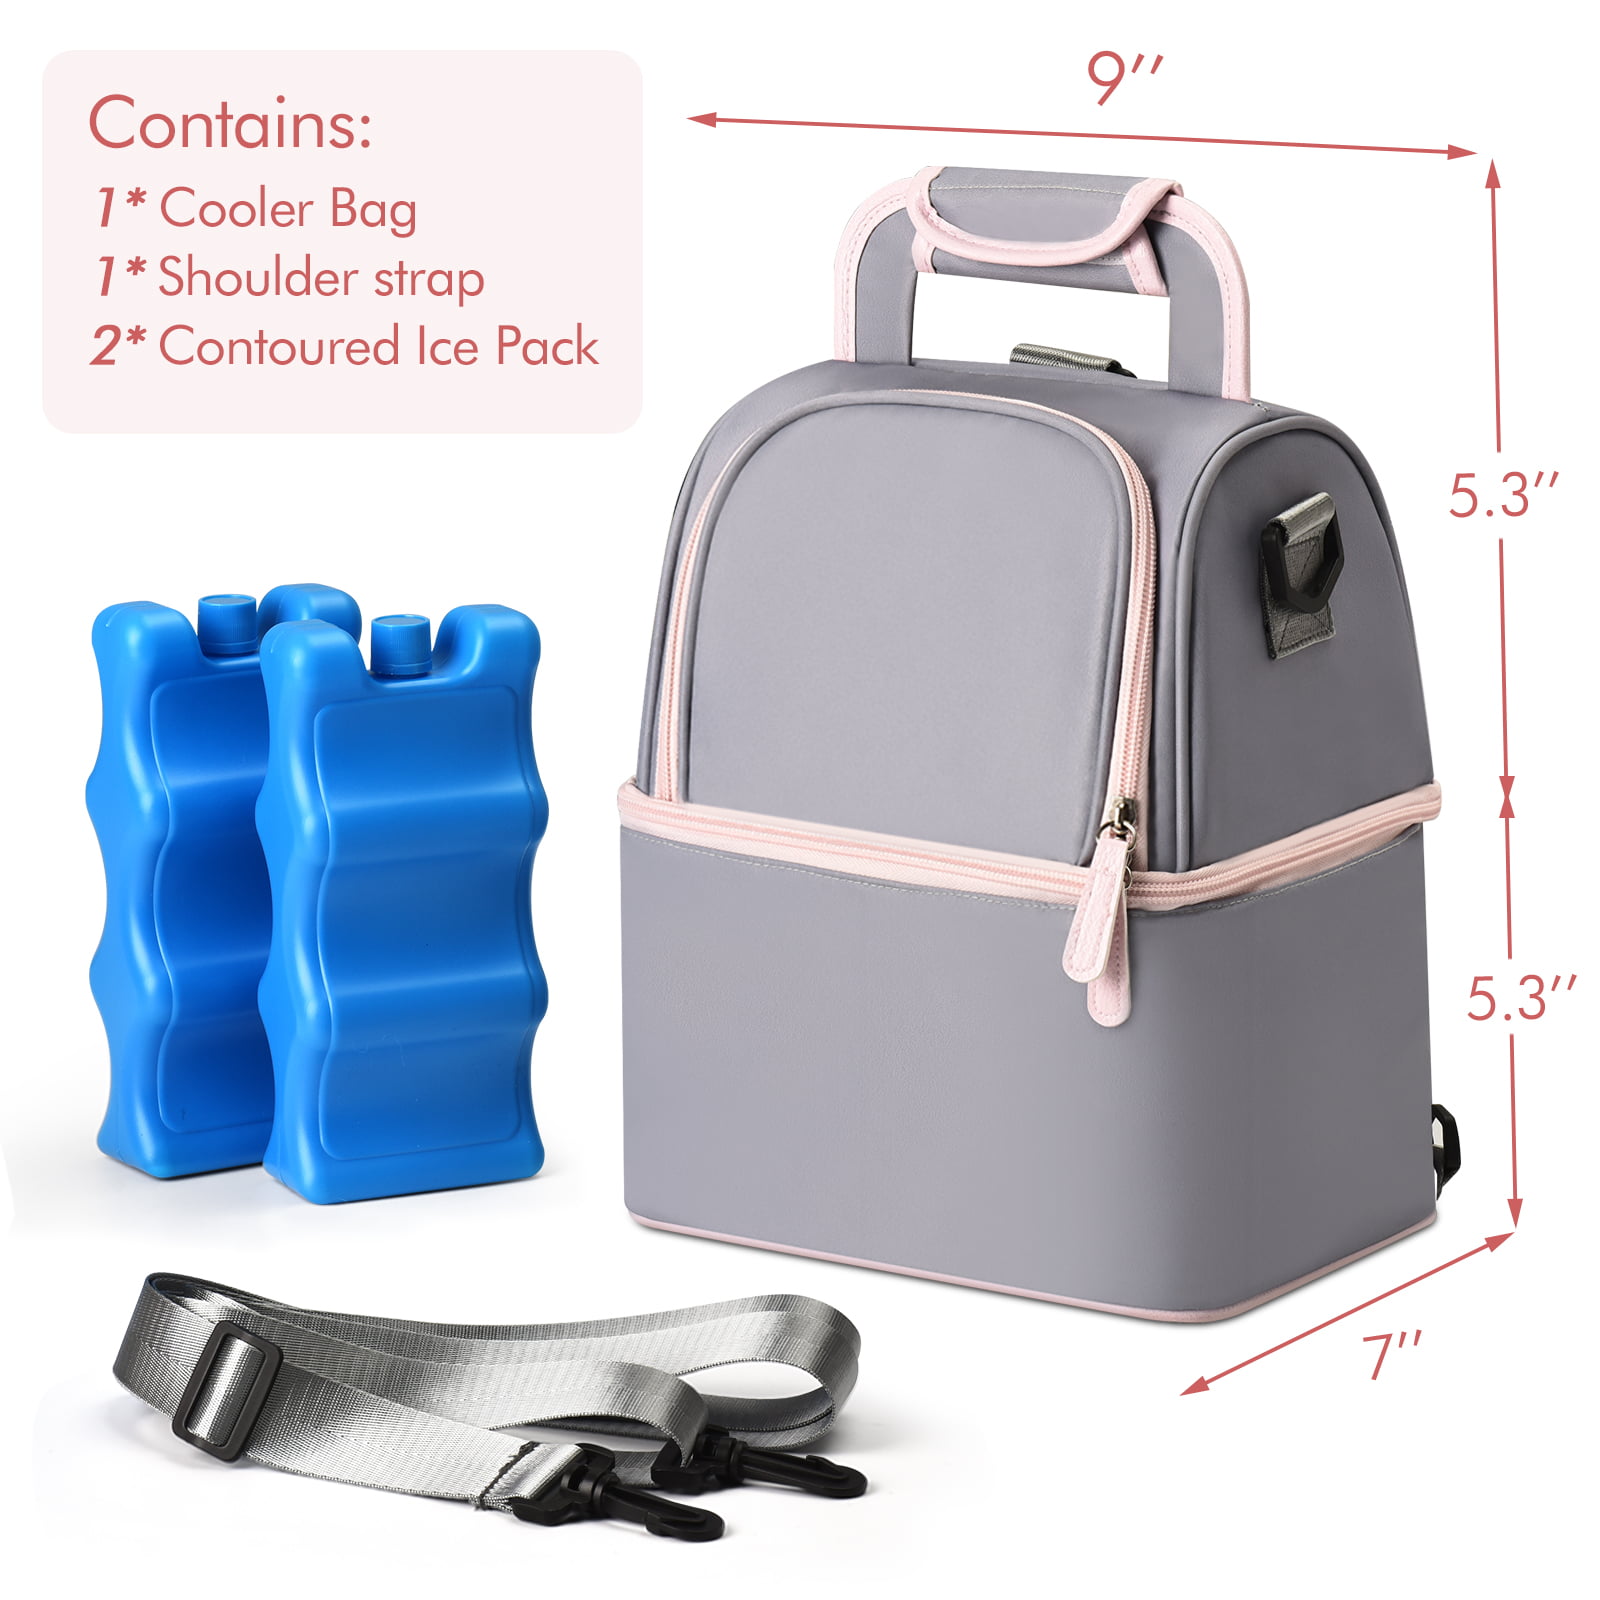 Breastmilk Cooler Bag with Ice Pack Keeps Your Milk in The Best Condition for Your Baby Everyday; Finally A Bag That Keeps Bottles Upright and Preven